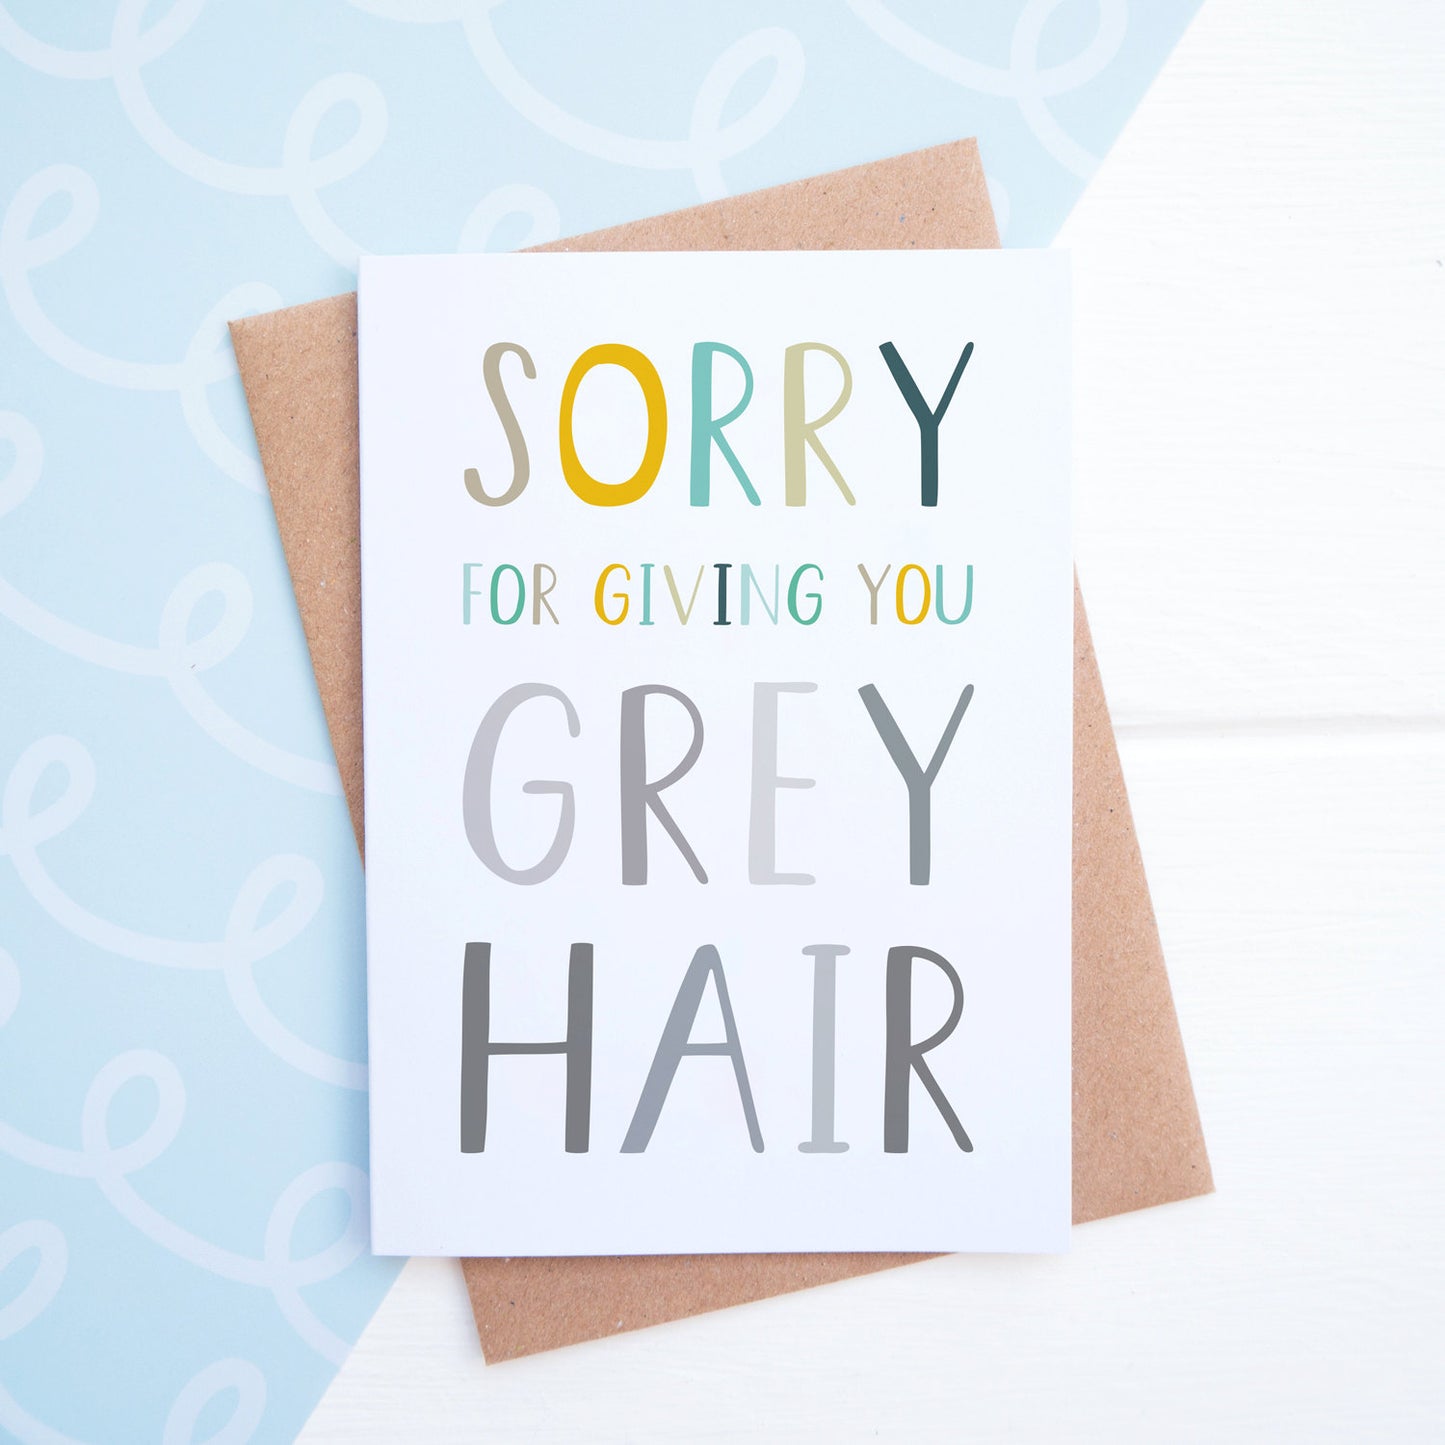 Sorry for giving you grey hair mothers day card in blue